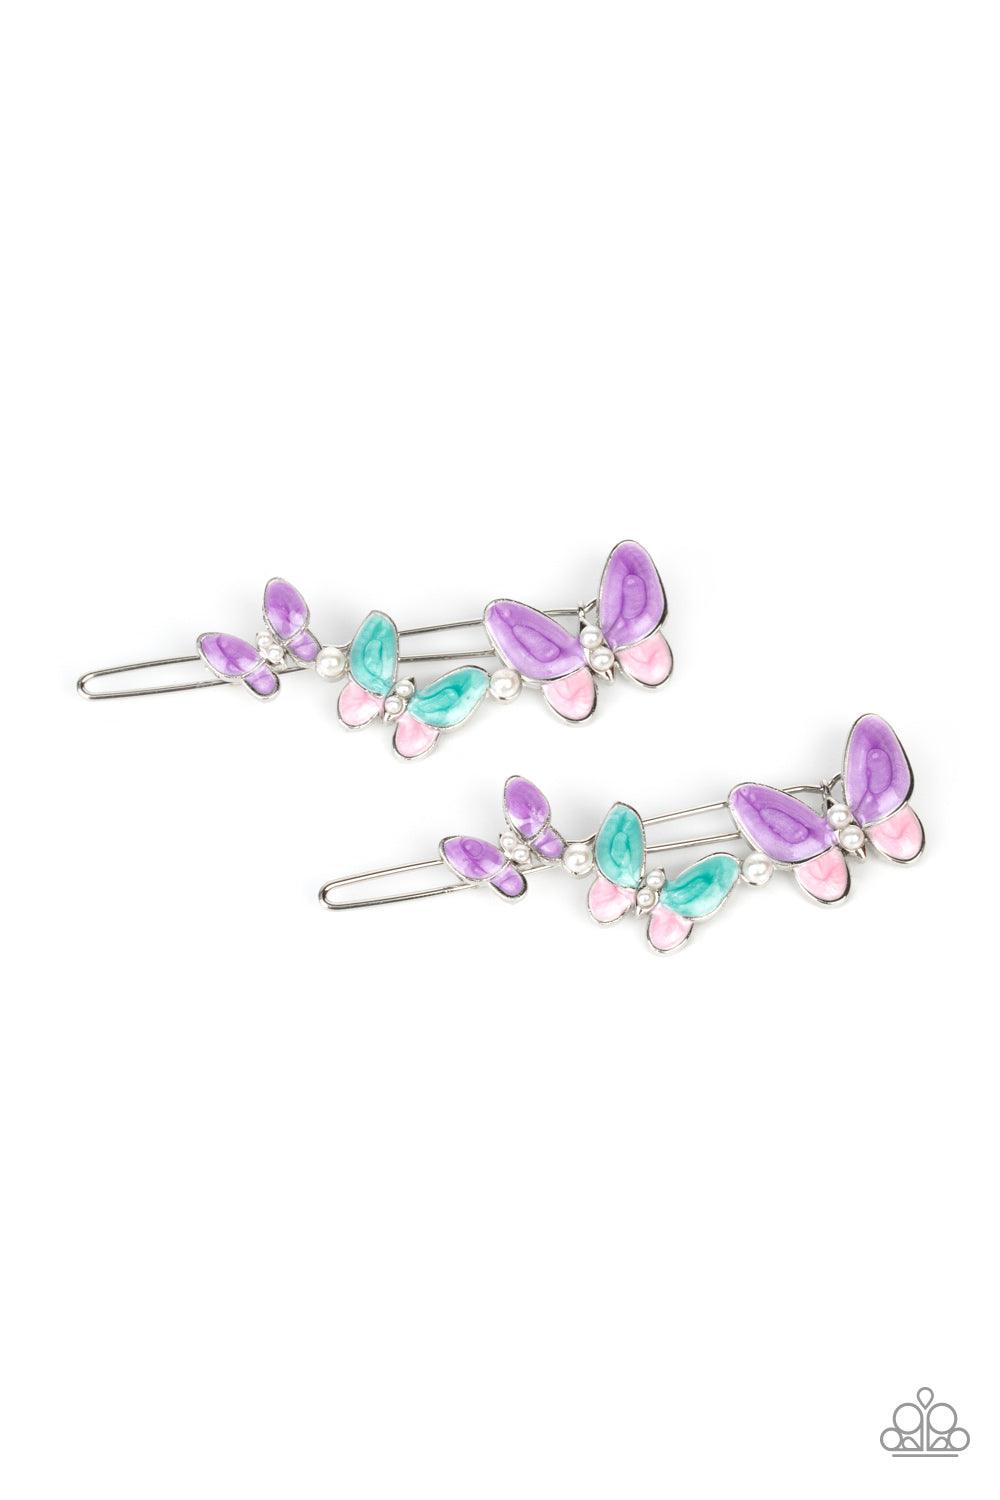 Paparazzi Accessories Bushels of Butterflies - Multi Accented with dainty pearl beads, a kaleidoscope of brightly painted butterflies flutter across the top of a silver clip. Features a standard hair clip on the back. Sold as one pair of hair clips. Brooc